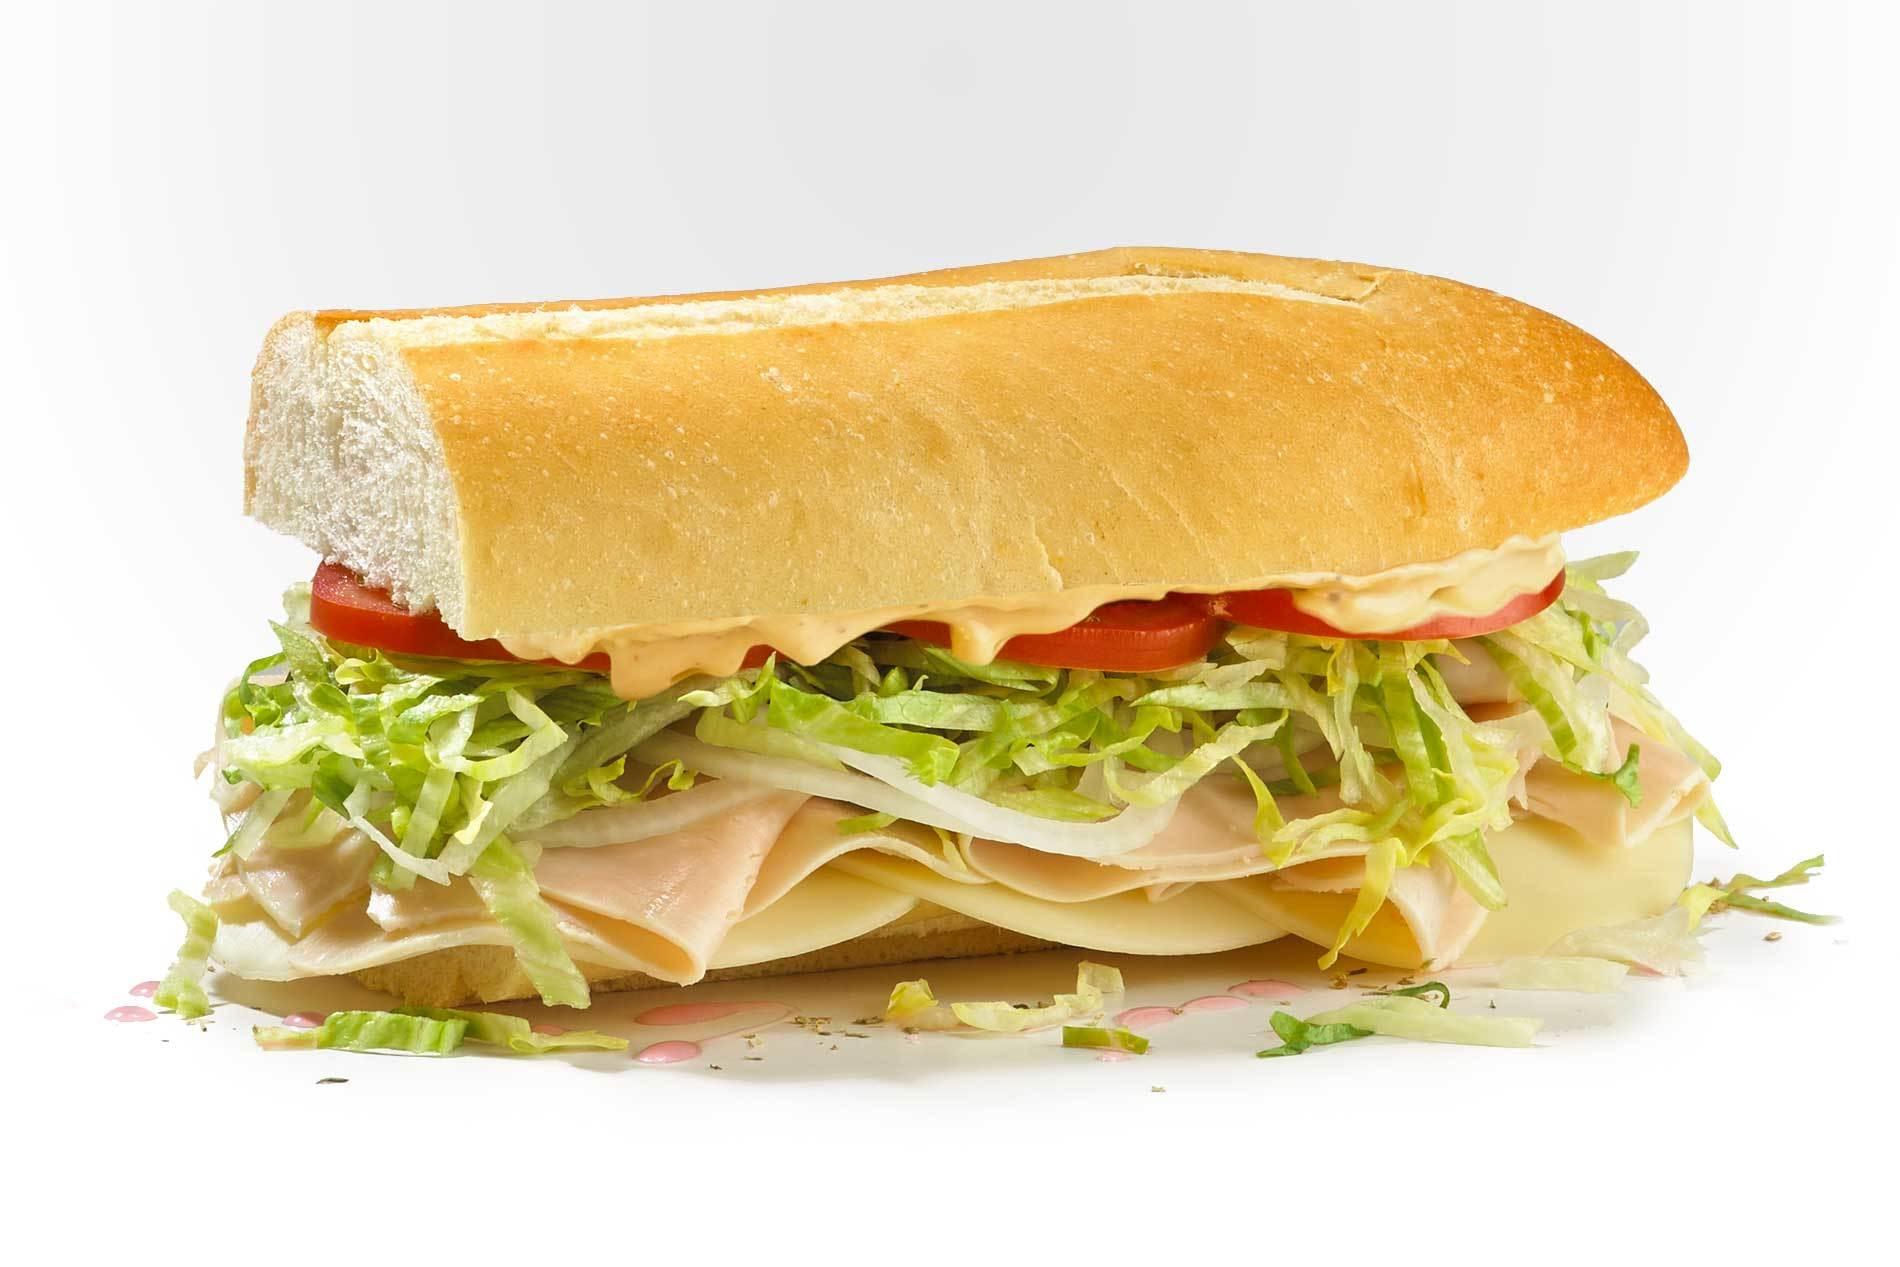 Jersey Mike's Giant Chipotle Turkey Sub Nutrition Facts